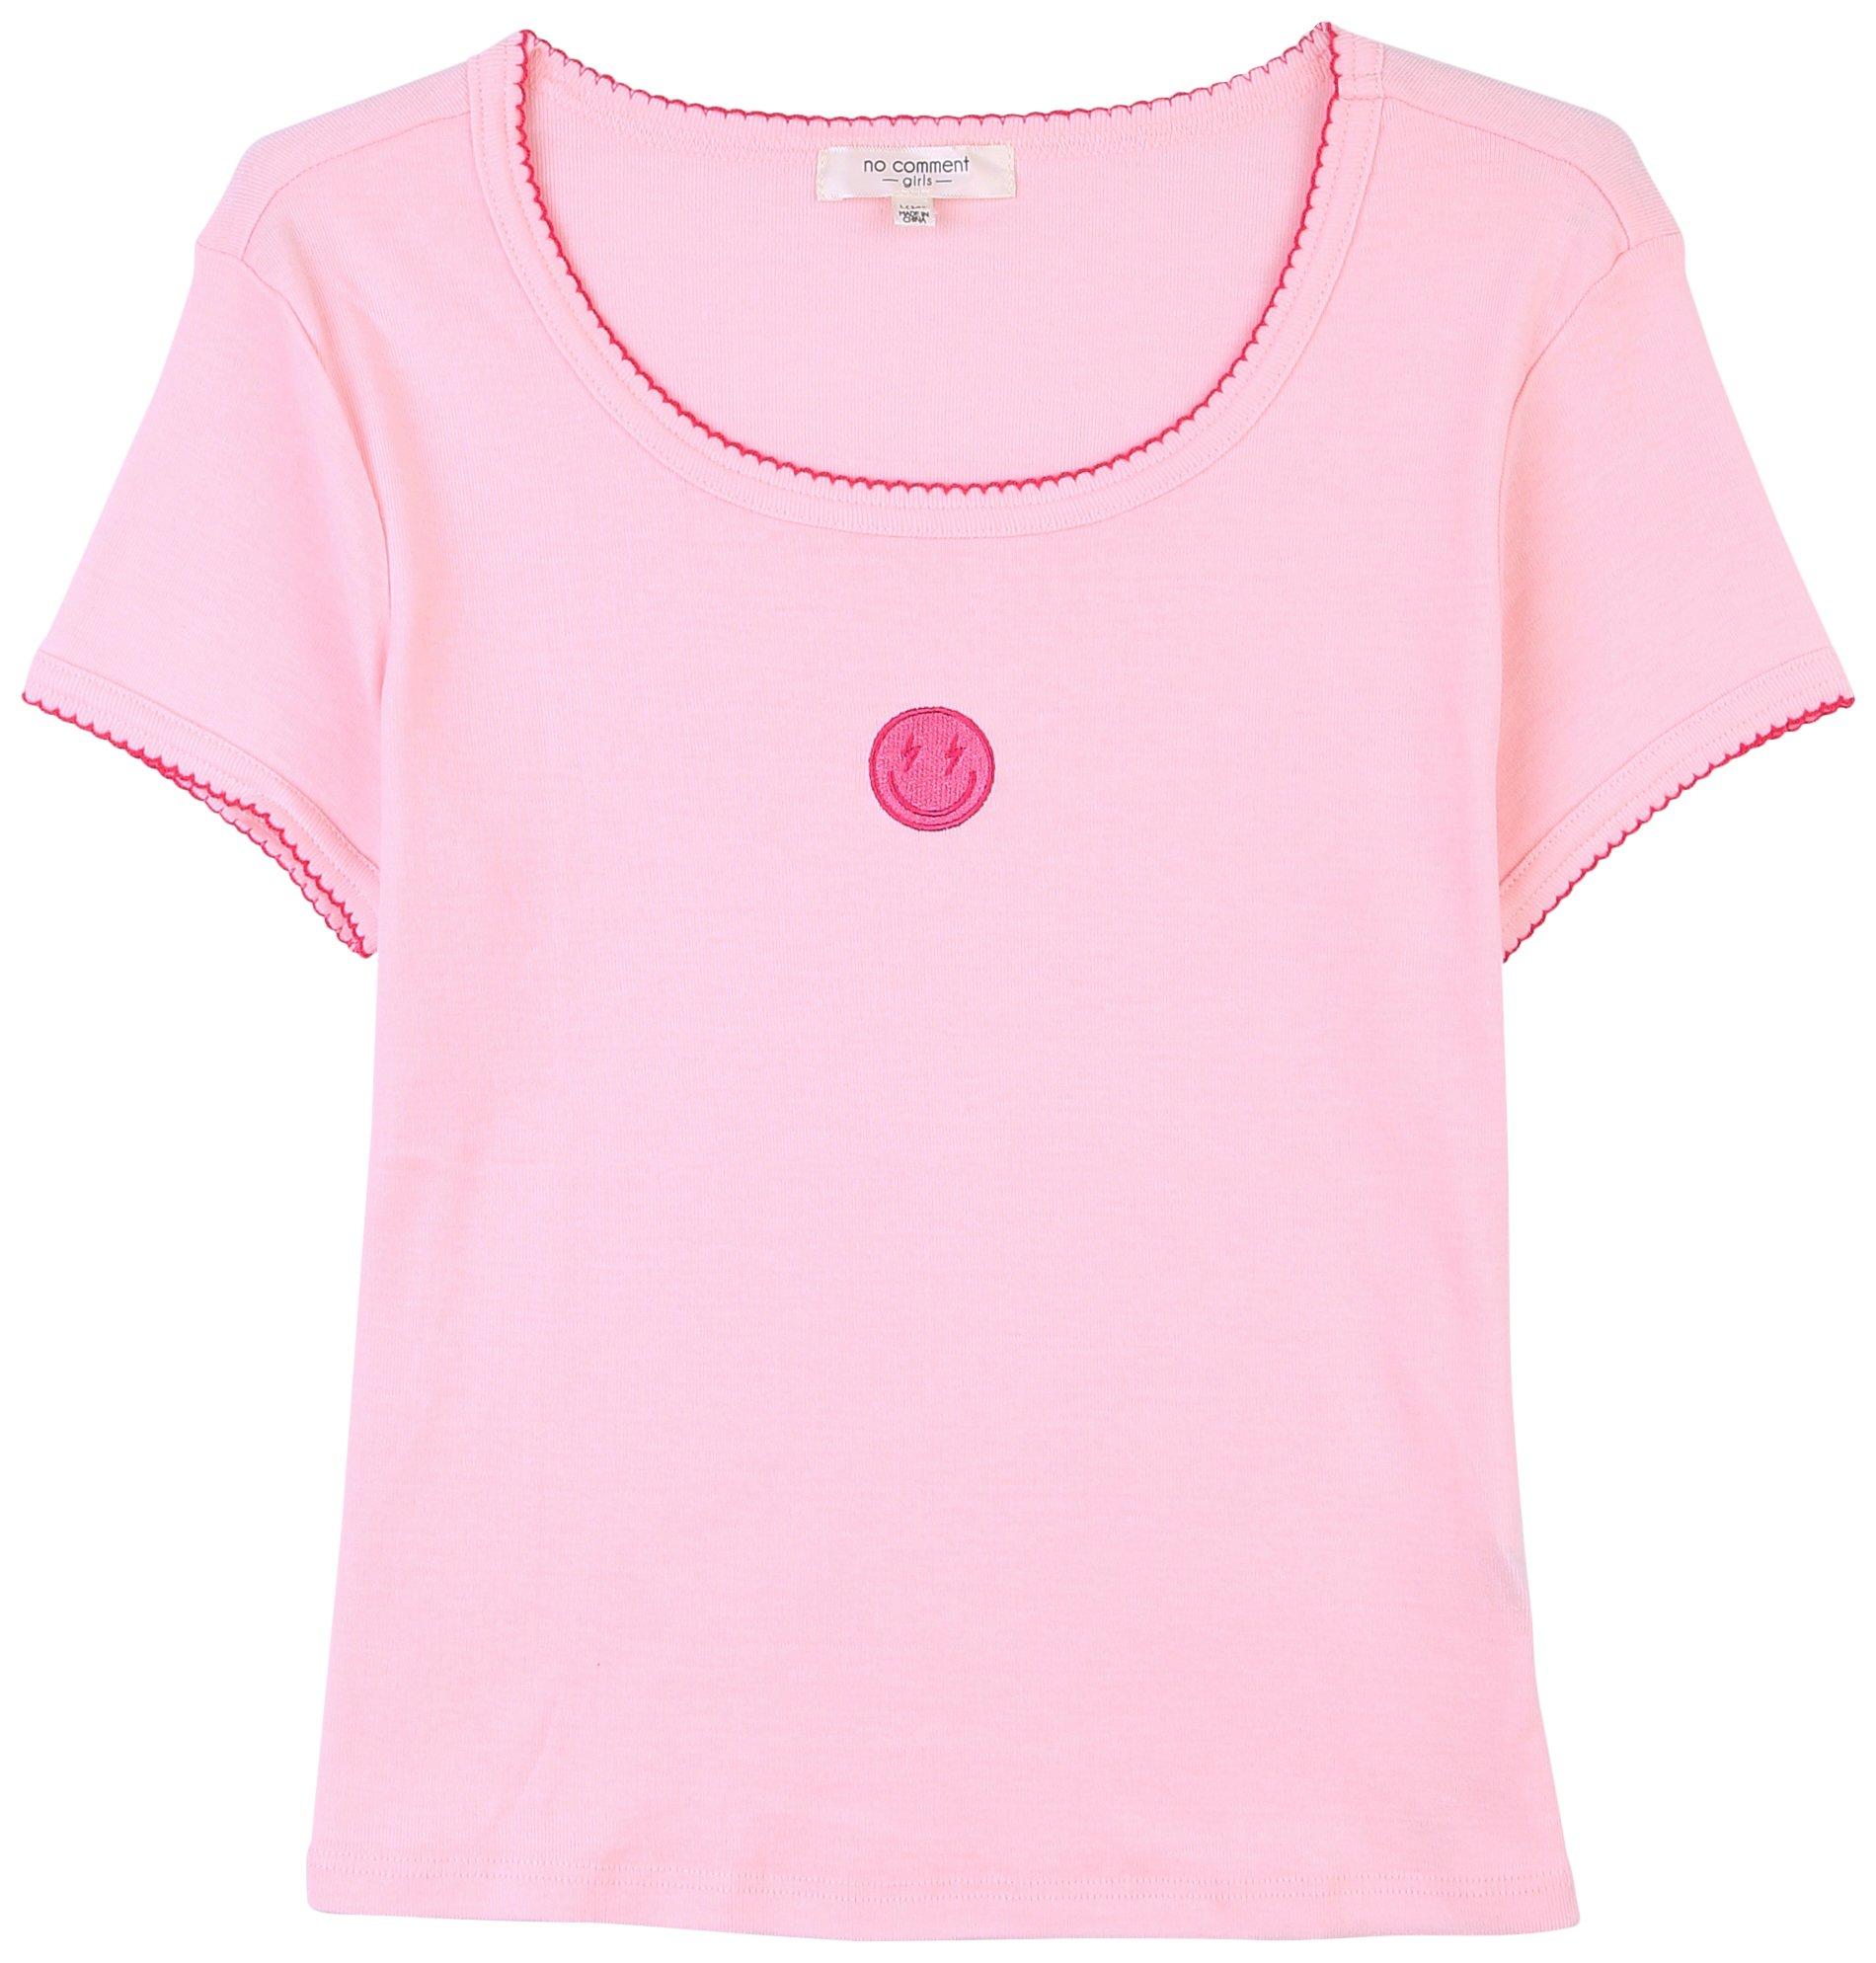 No Comment Big Girls Embroidered Smiley Face Top